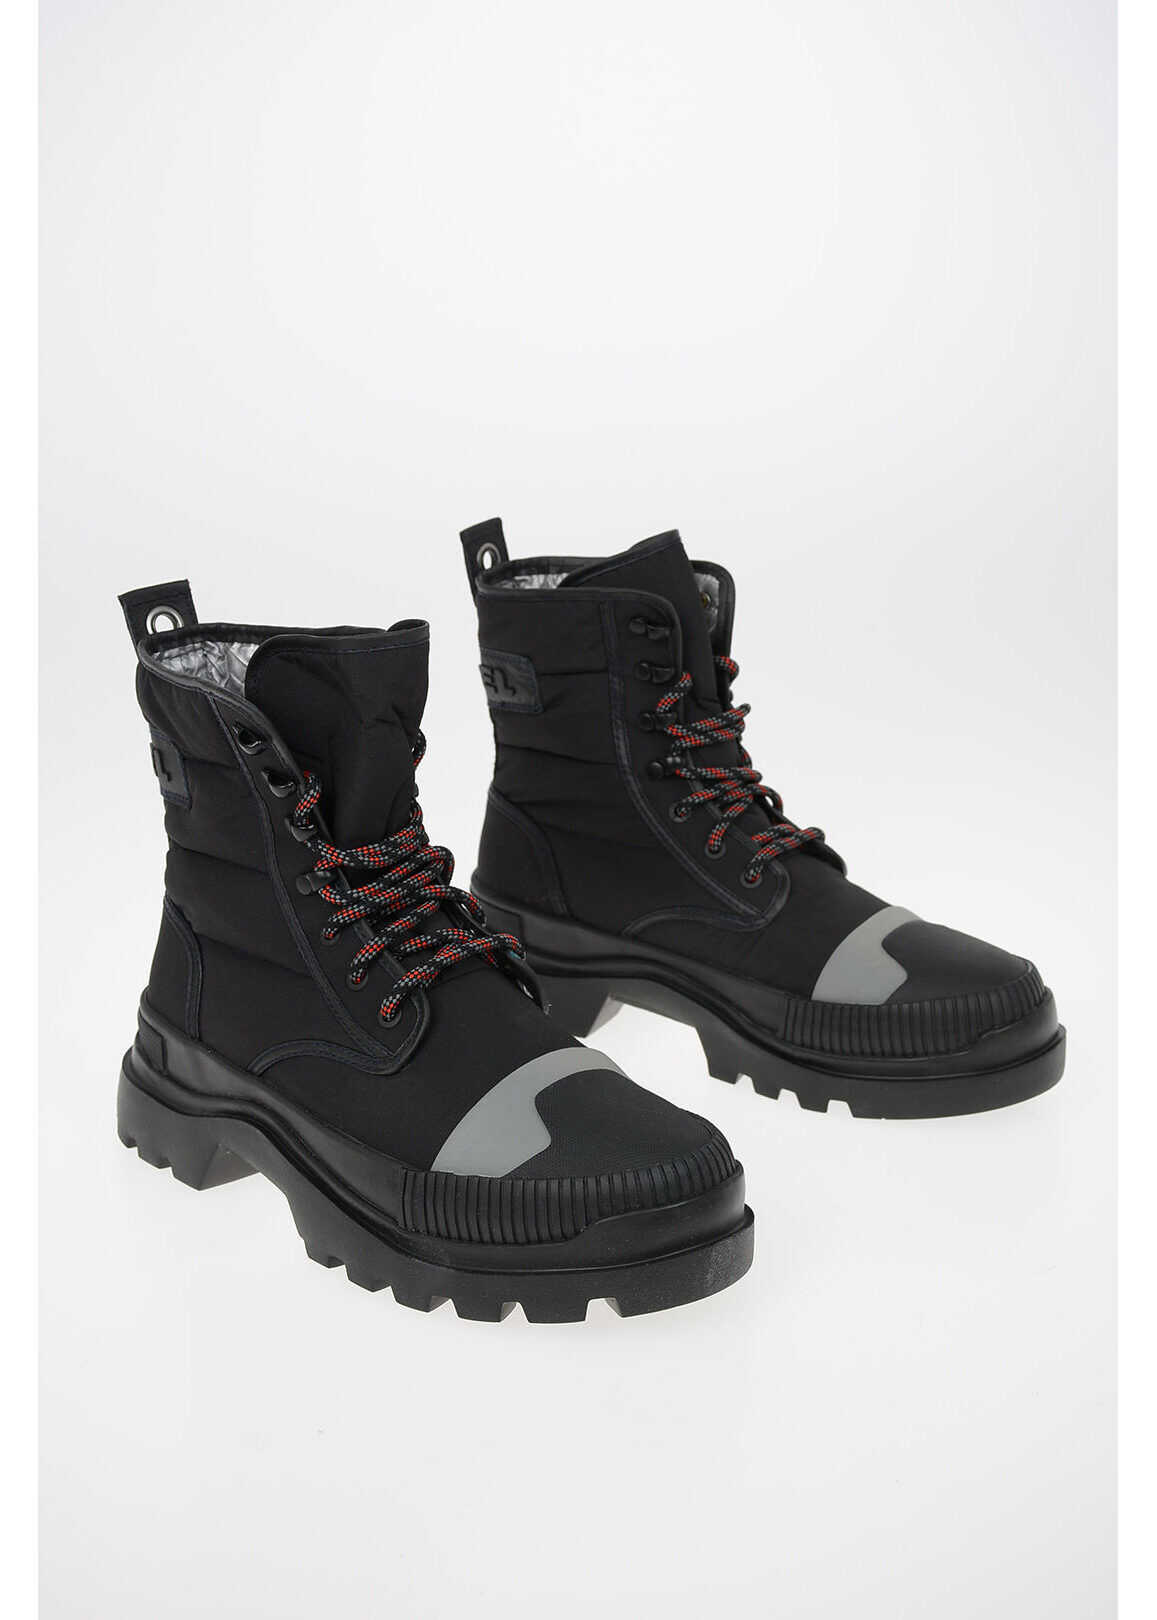 Diesel Fabric VAIONT Hiking Boots BLACK